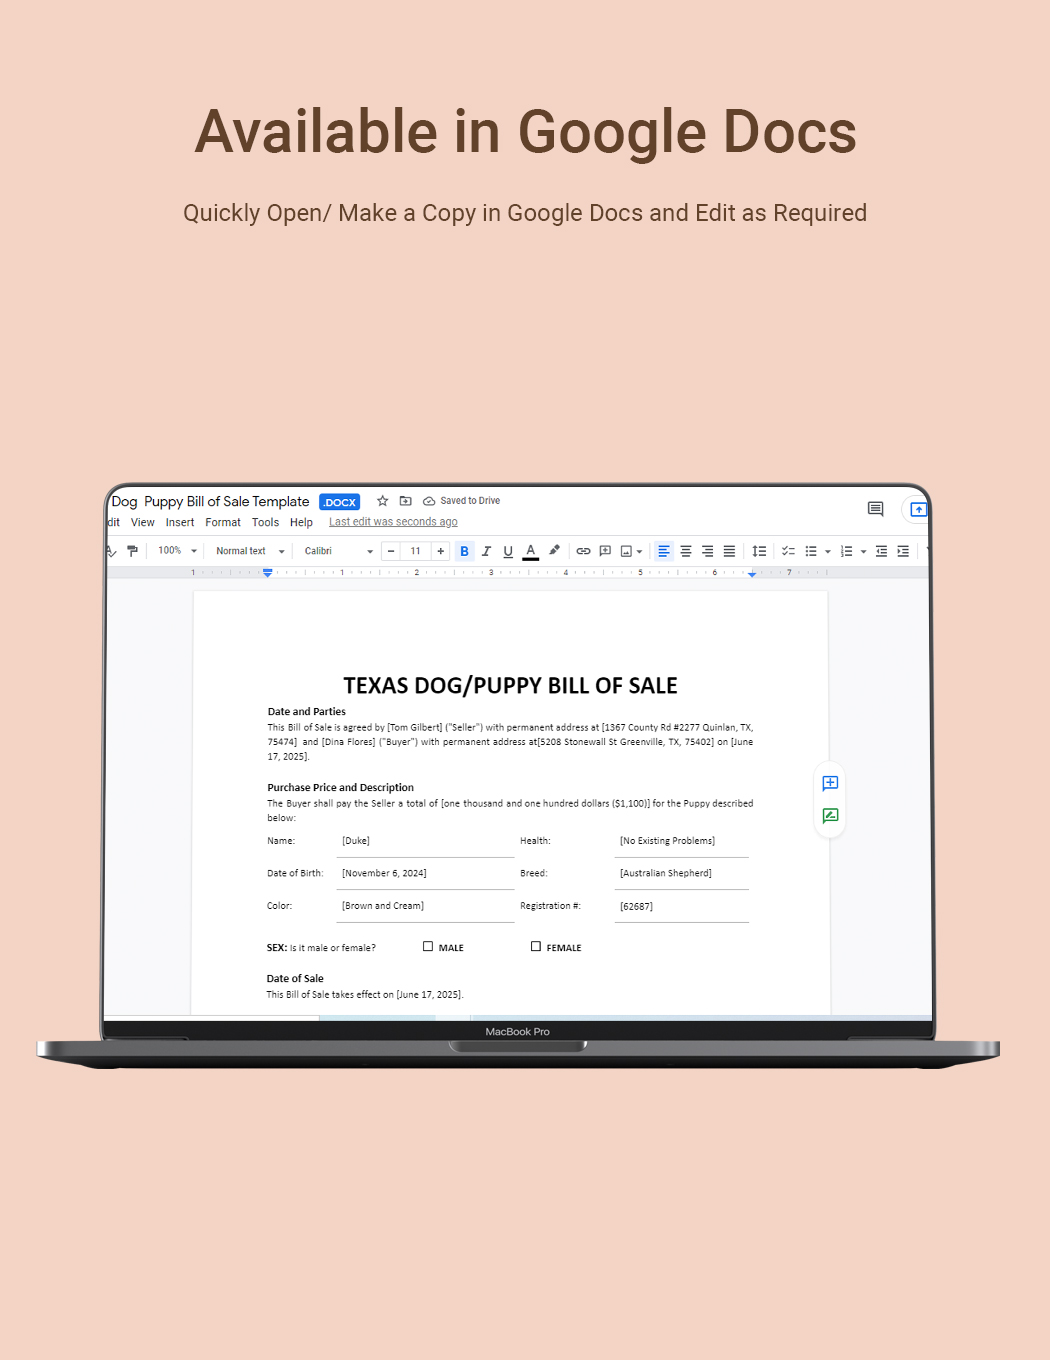 Texas Dog / Puppy Bill of Sale Template